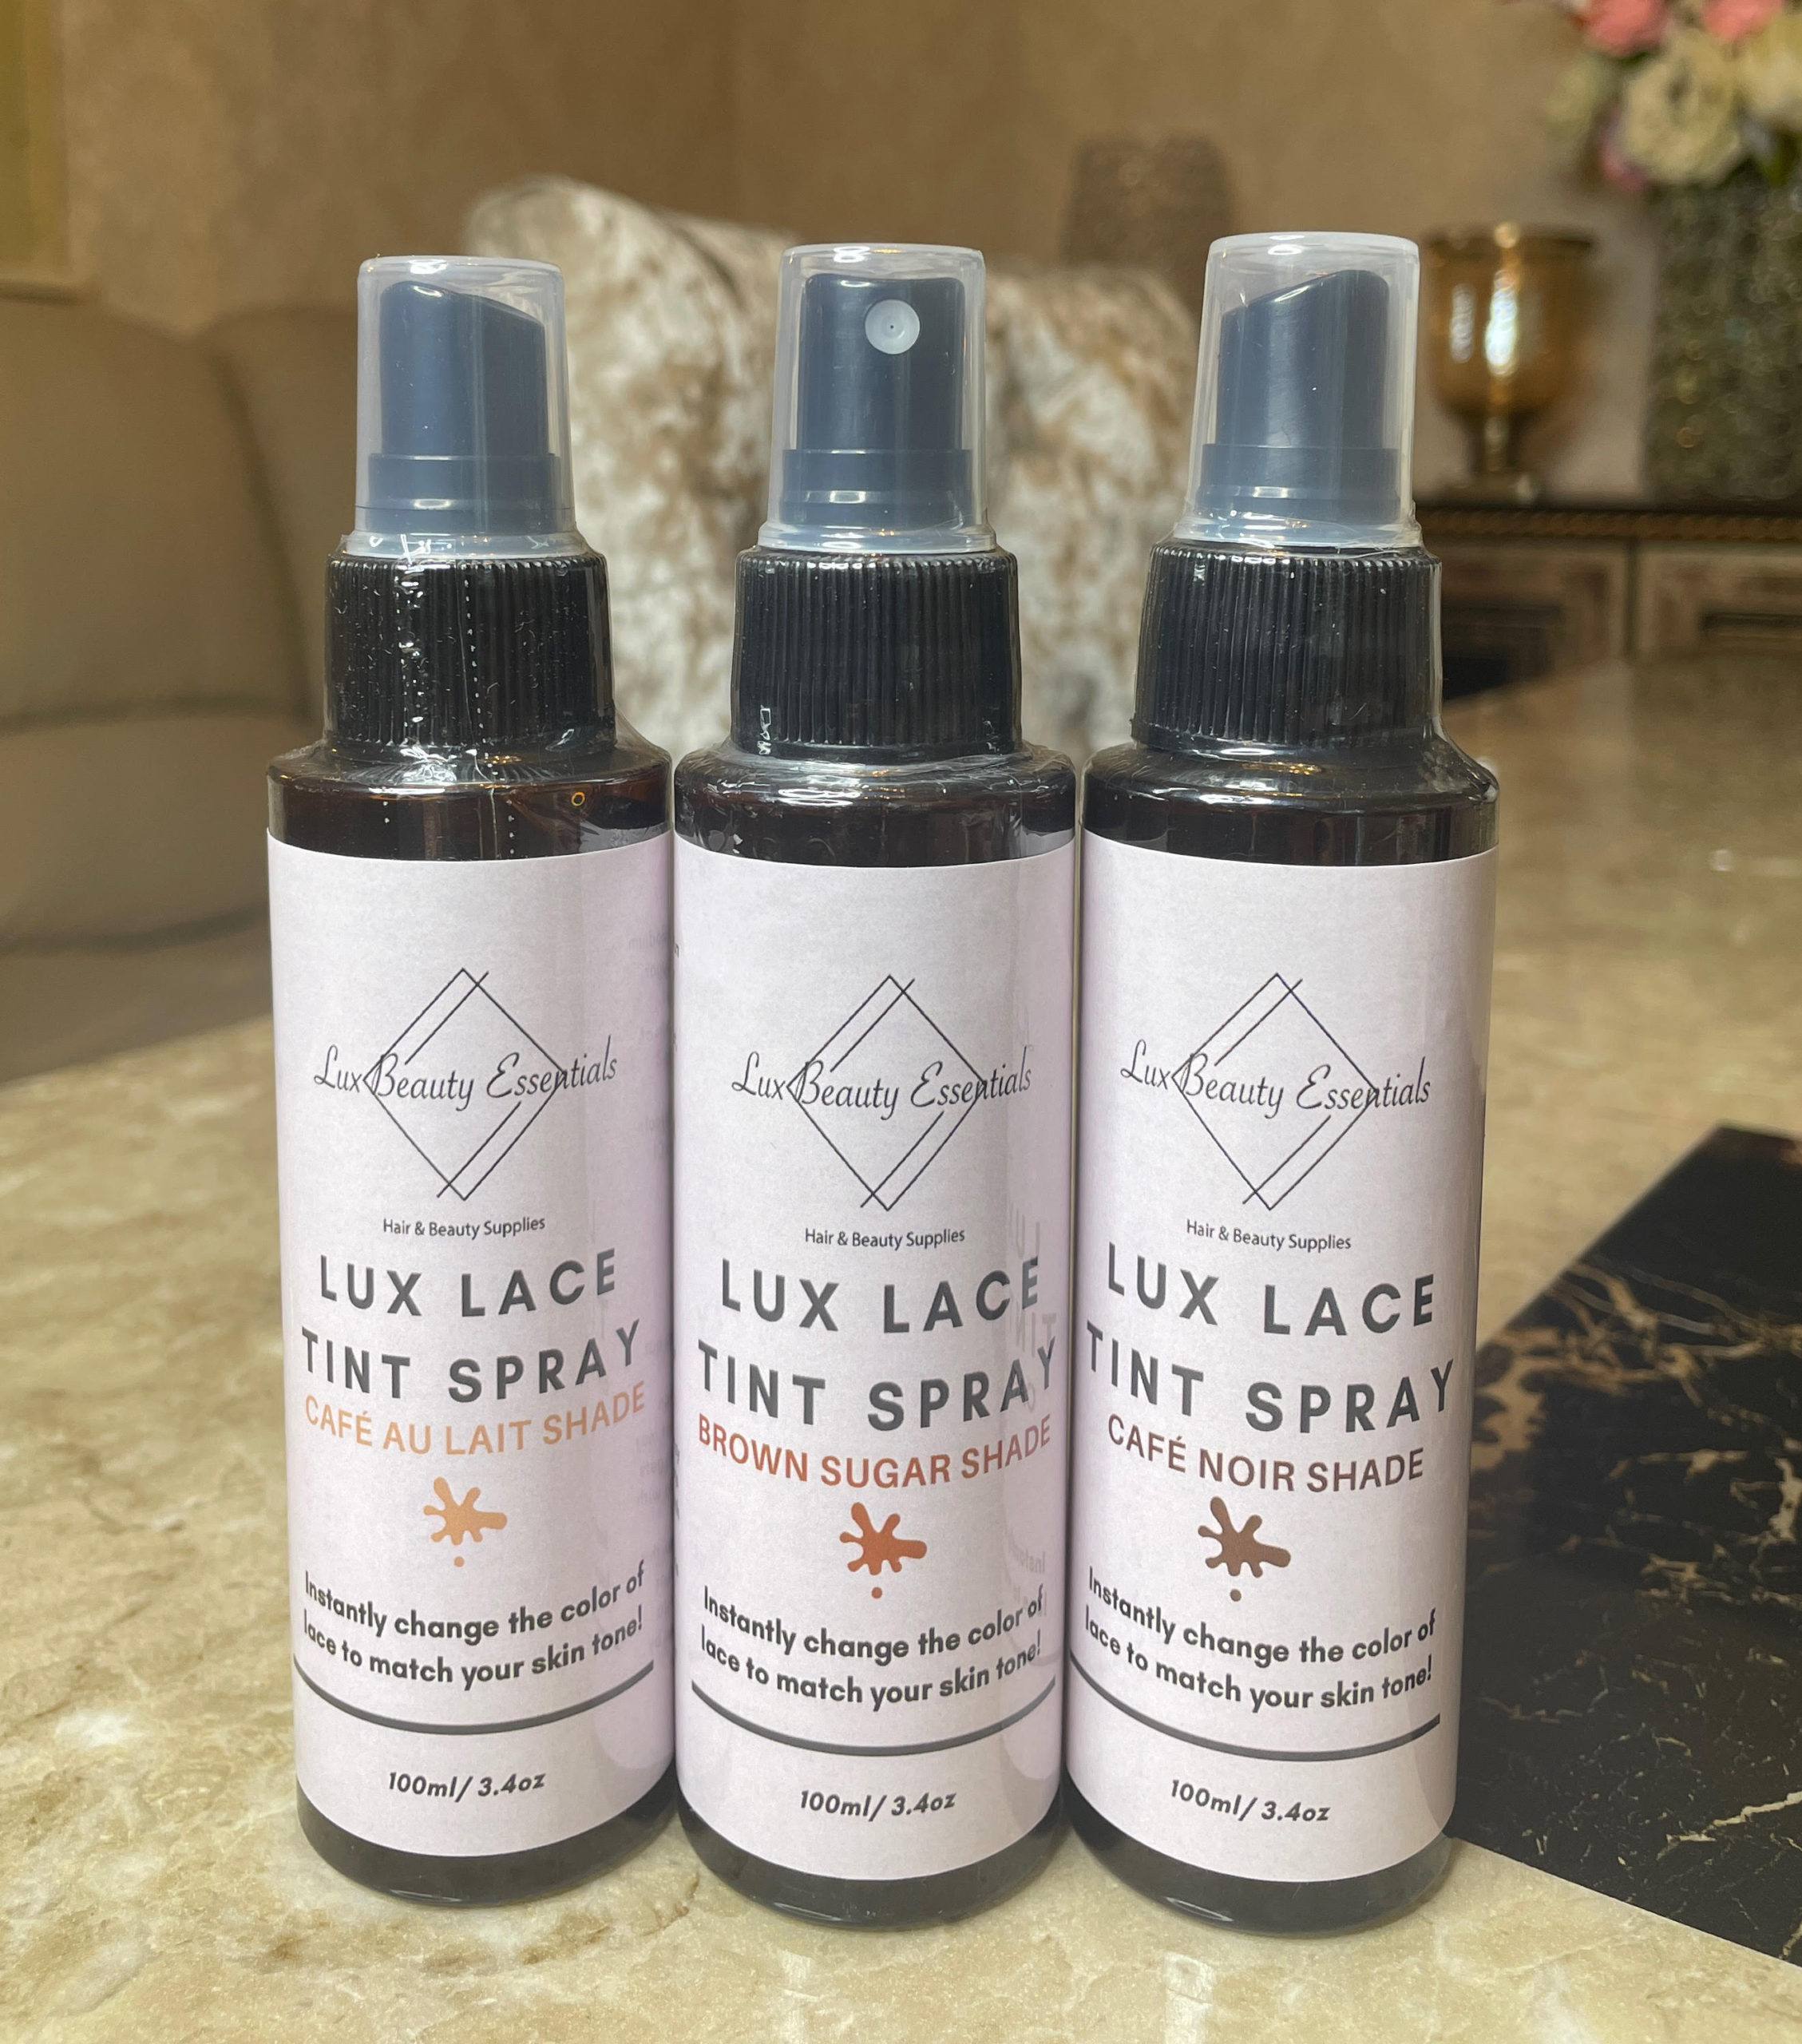 Lux Lace Tint Spray - Blend your lace! - Lux Beauty Essentials